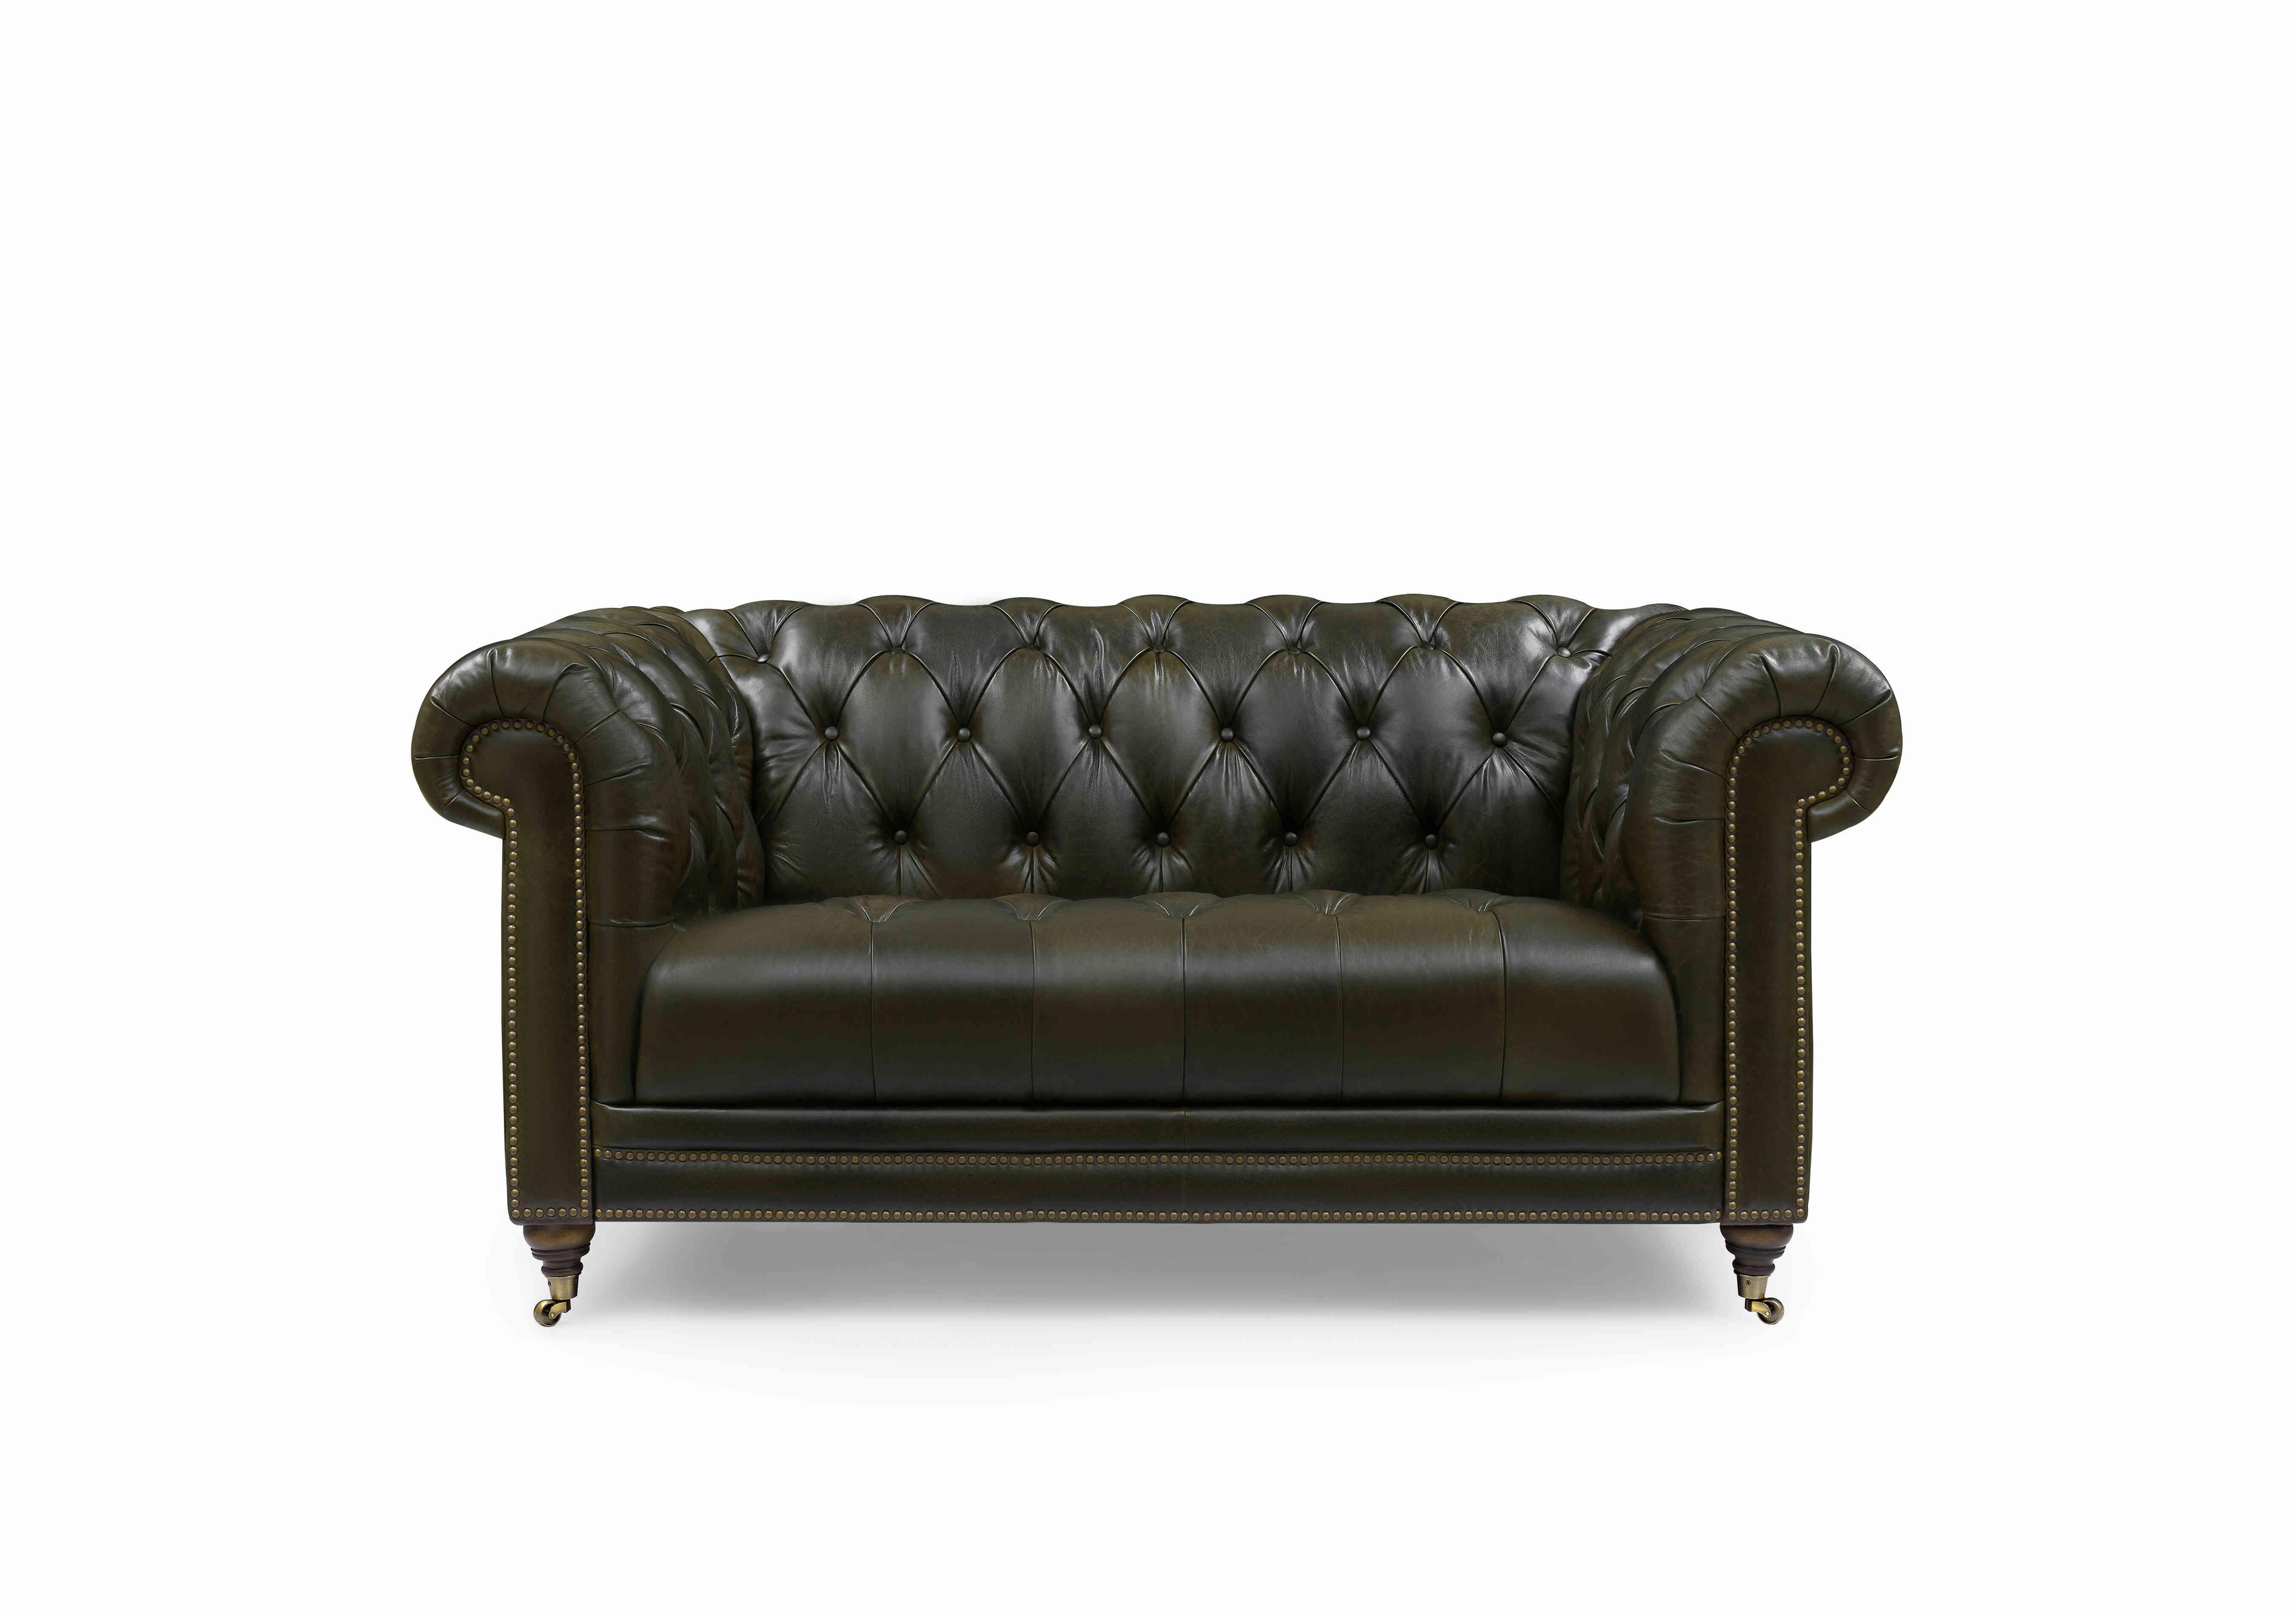 Walter 2 Seater Leather Chesterfield Sofa with USB-C in X3y1-1965ls Emerald on Furniture Village